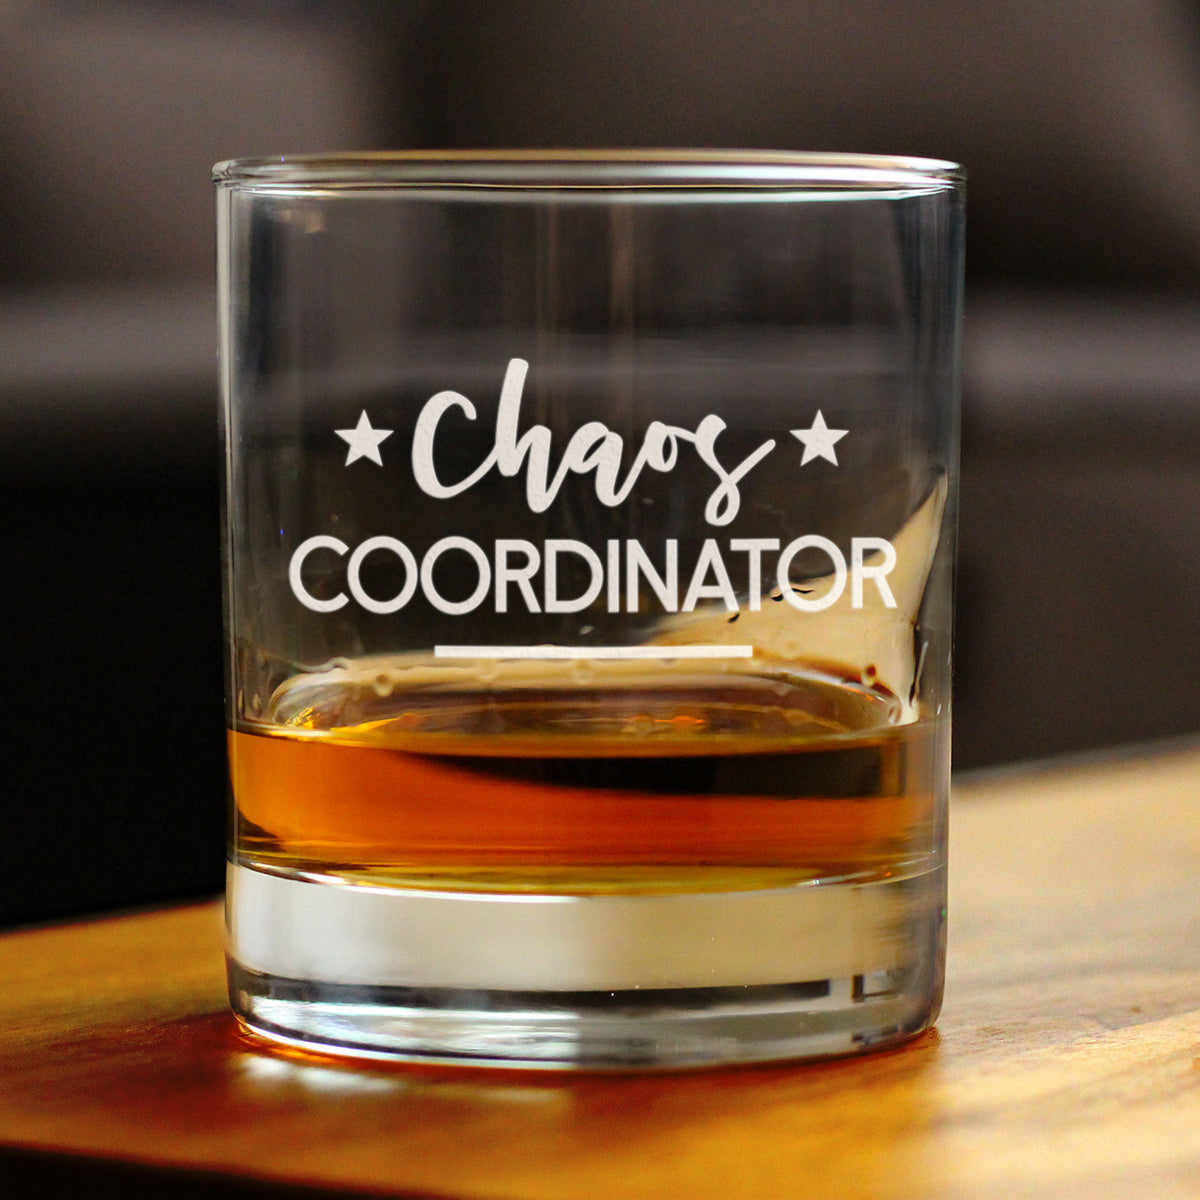 Chaos Coordinator - Whiskey Rocks Glass Gifts - Funny Gifts for Secretaries, Moms, and Teachers - 10.25 Oz Glasses